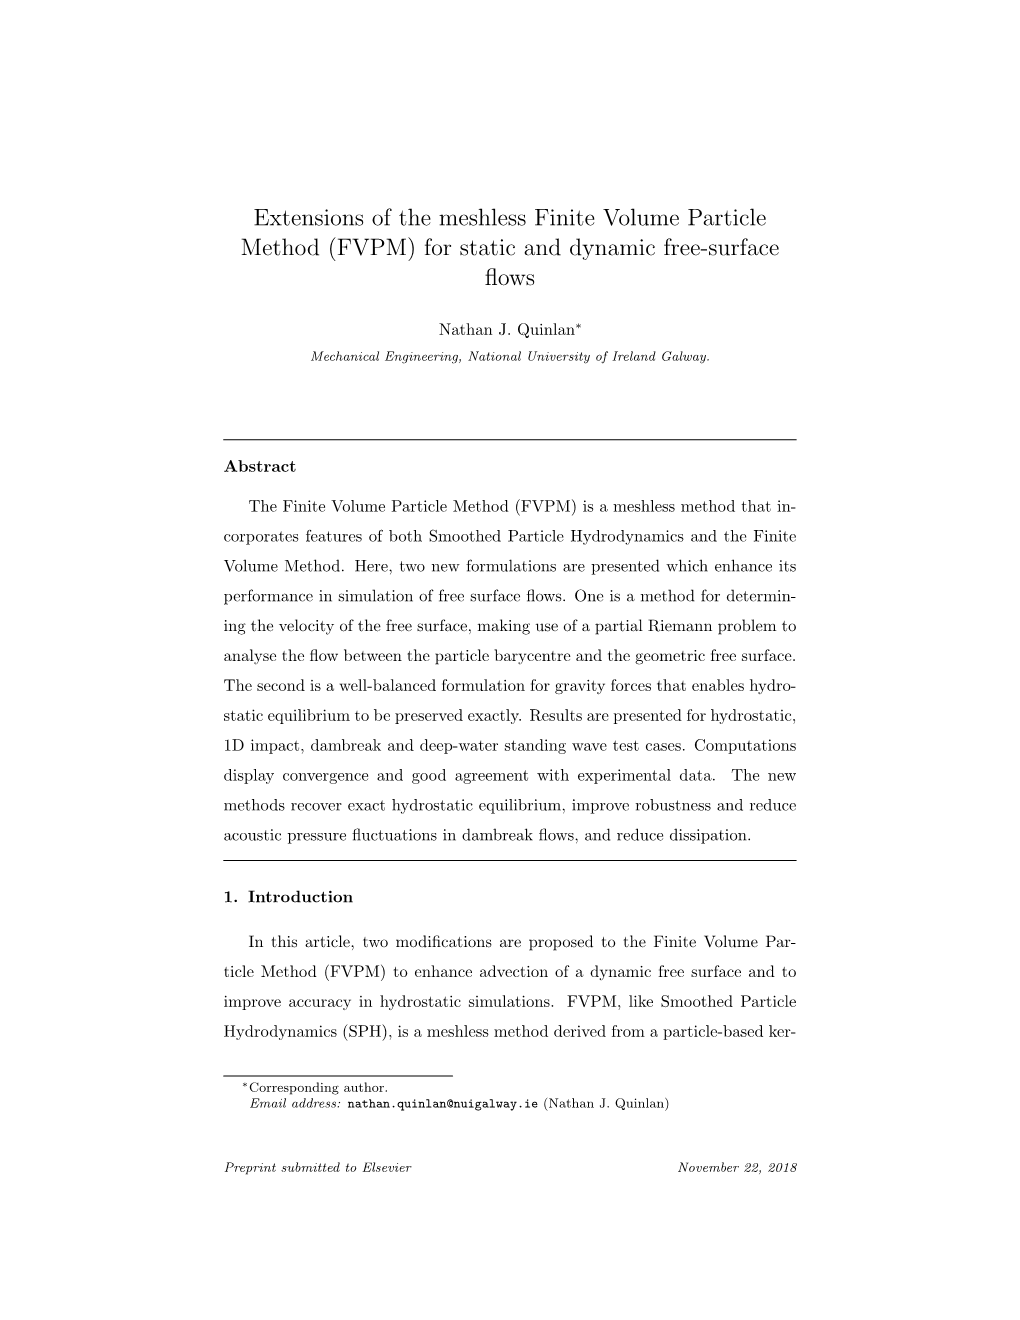 Extensions of the Meshless Finite Volume Particle Method (FVPM) for Static and Dynamic Free-Surface ﬂows